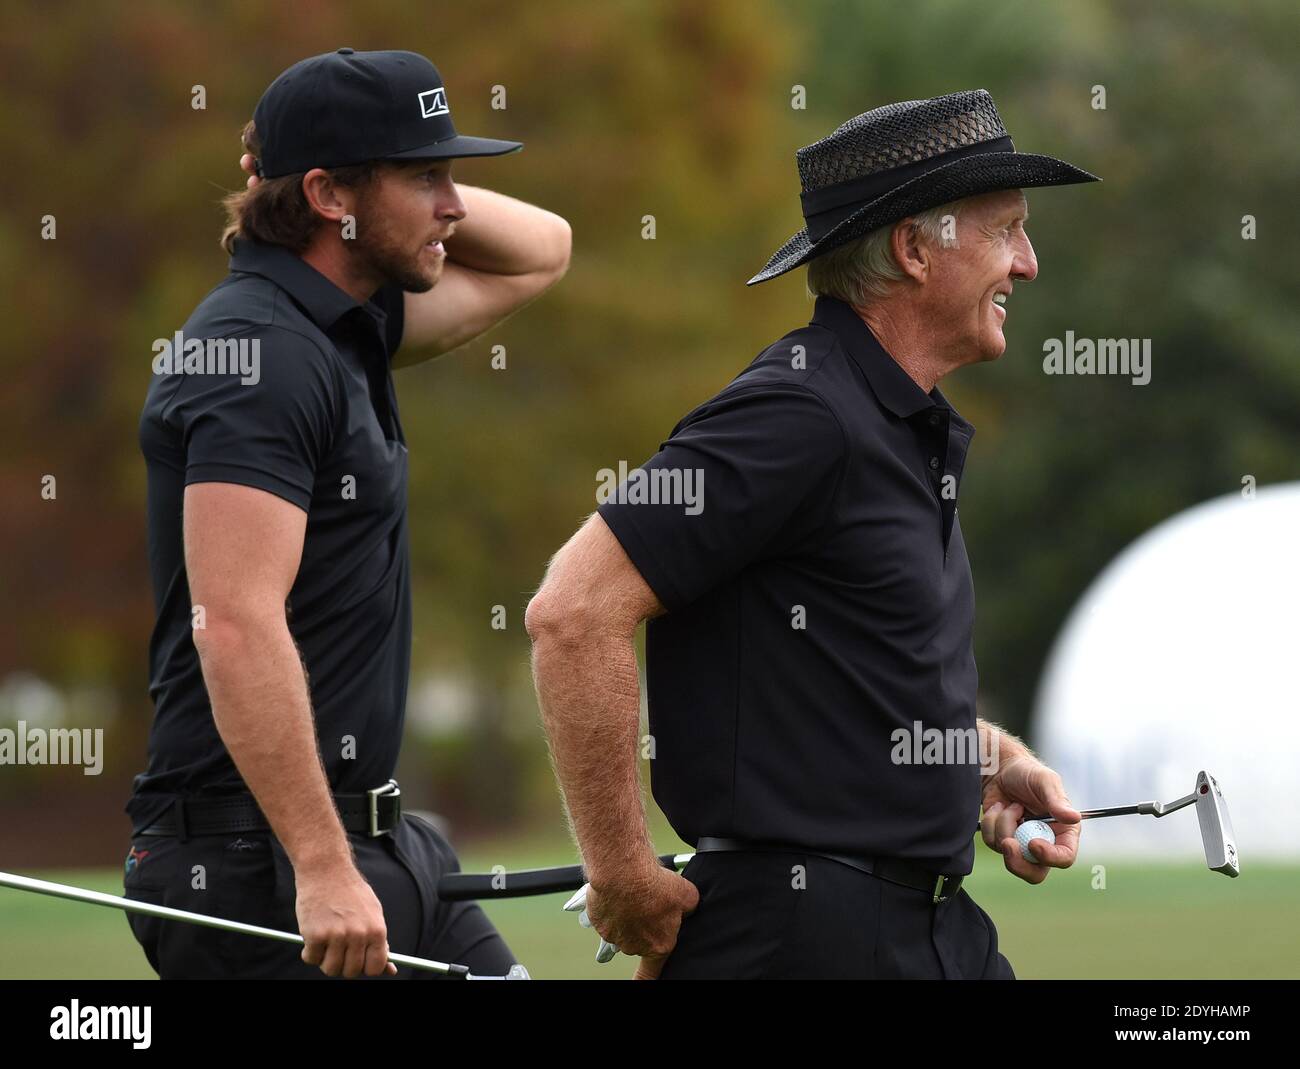 December 20, 2020 - Orlando, Florida, United States - Australian Greg Norman (r) and his son, Greg Norman Jr. prepare to putt on the 18th green during the final round at the PNC Championship golf tournament at the Ritz-Carlton Golf Club on December 20, 2020 in Orlando, Florida. On Christmas Day, Norman posted a photo to Instagram from a hospital bed where he was being treated for COVID-19 symptoms. NormanÕs son also posted a photo to Instagram, stating that he and his fiancee have tested positive for the COVID-19 virus. (Paul Hennessy/Alamy) Stock Photo